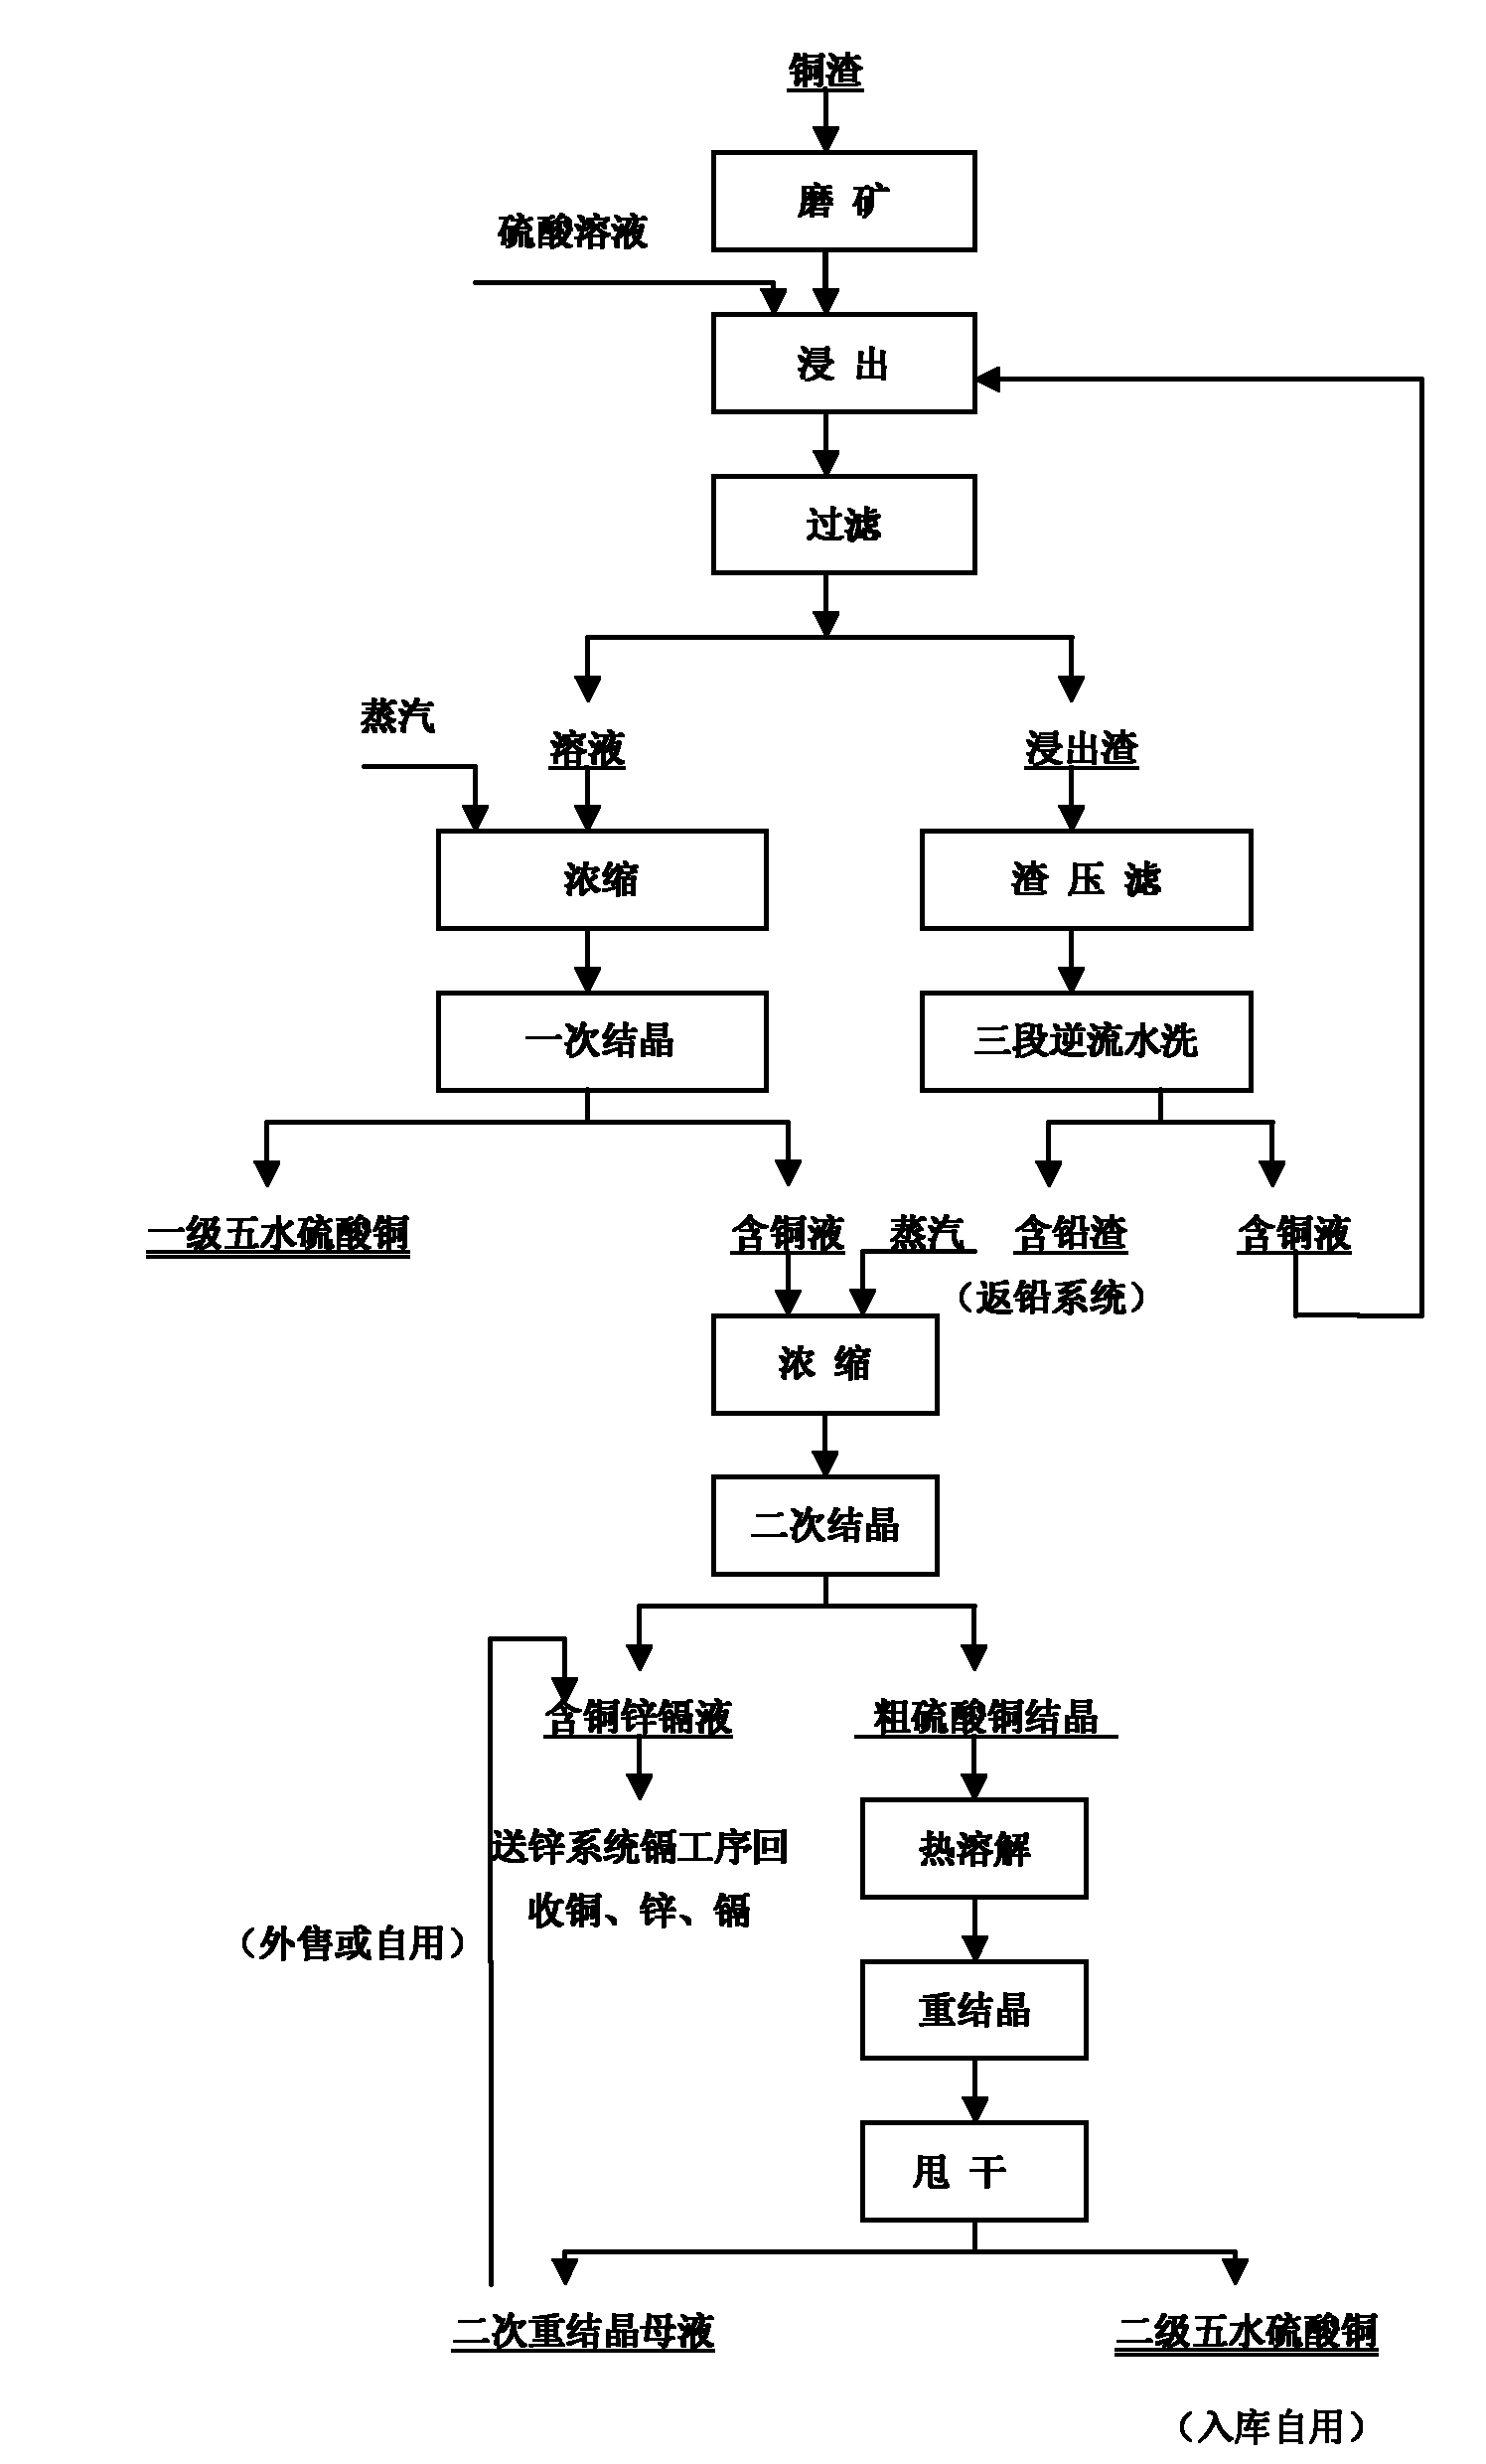 Process method for producing copper sulfate by using copper scale at normal temperature and normal pressure